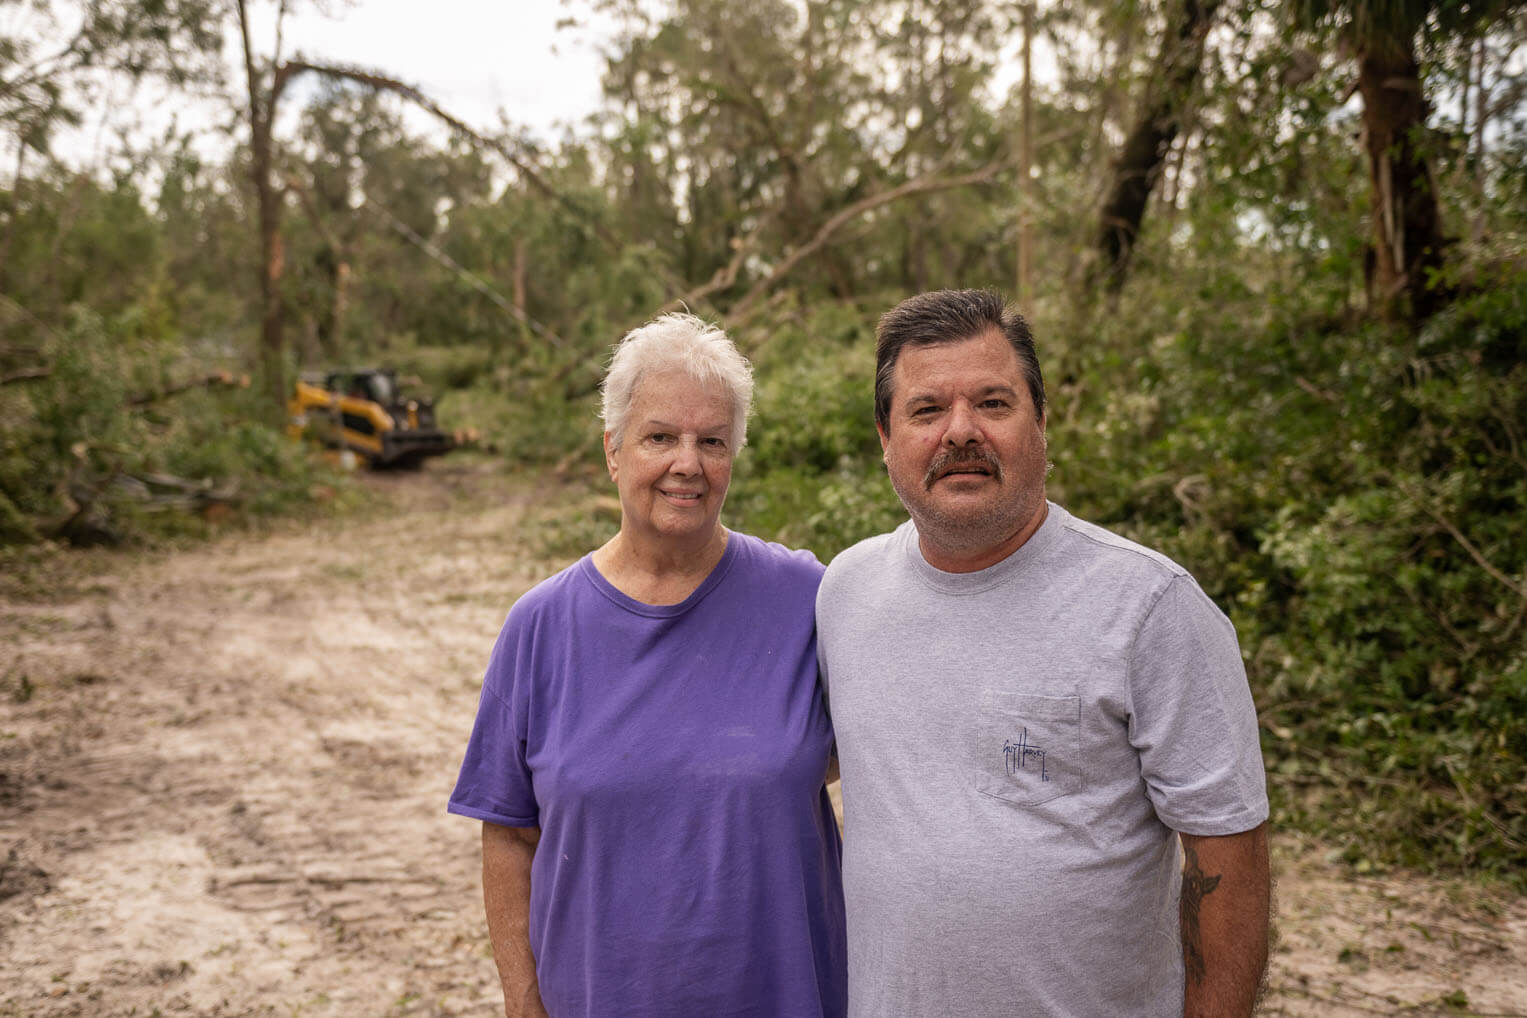 Kim Cannon prayed for her brother as Idalia ripped through Taylor County. He was trapped by trees and debris inside his Perry, Florida, home. Our volunteers helped cut him out.